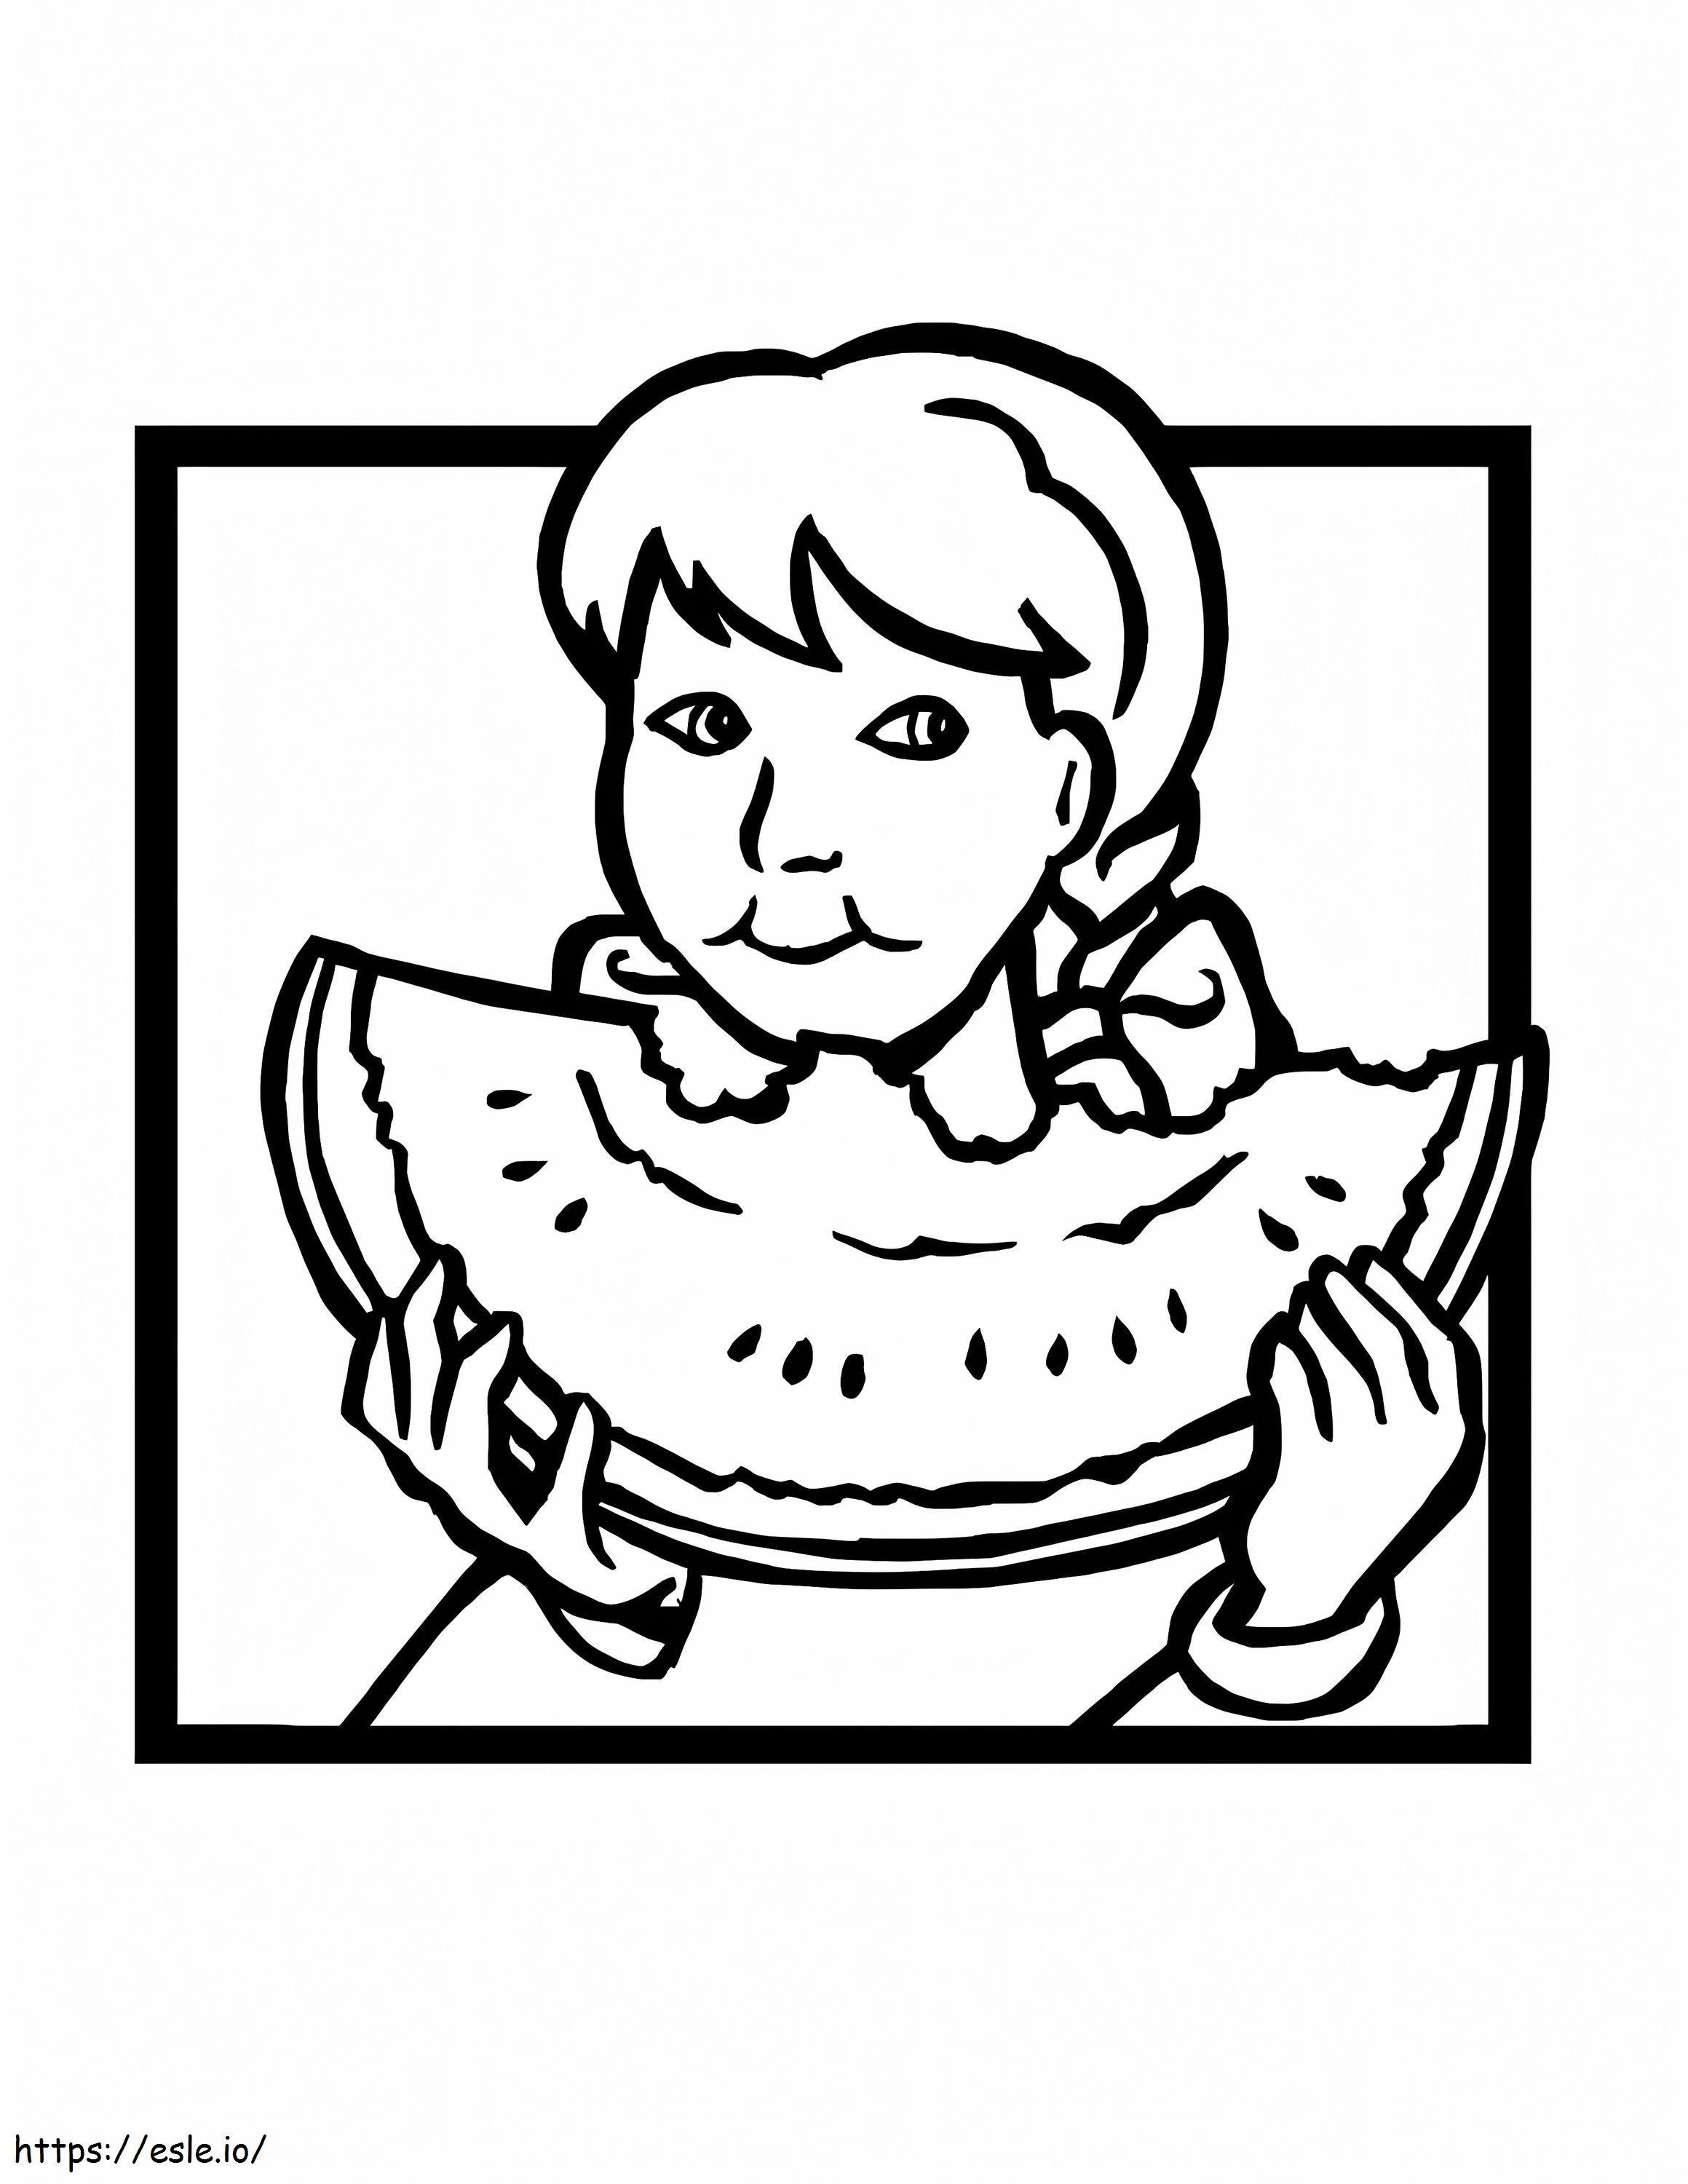 Girl Eating Watermelon coloring page